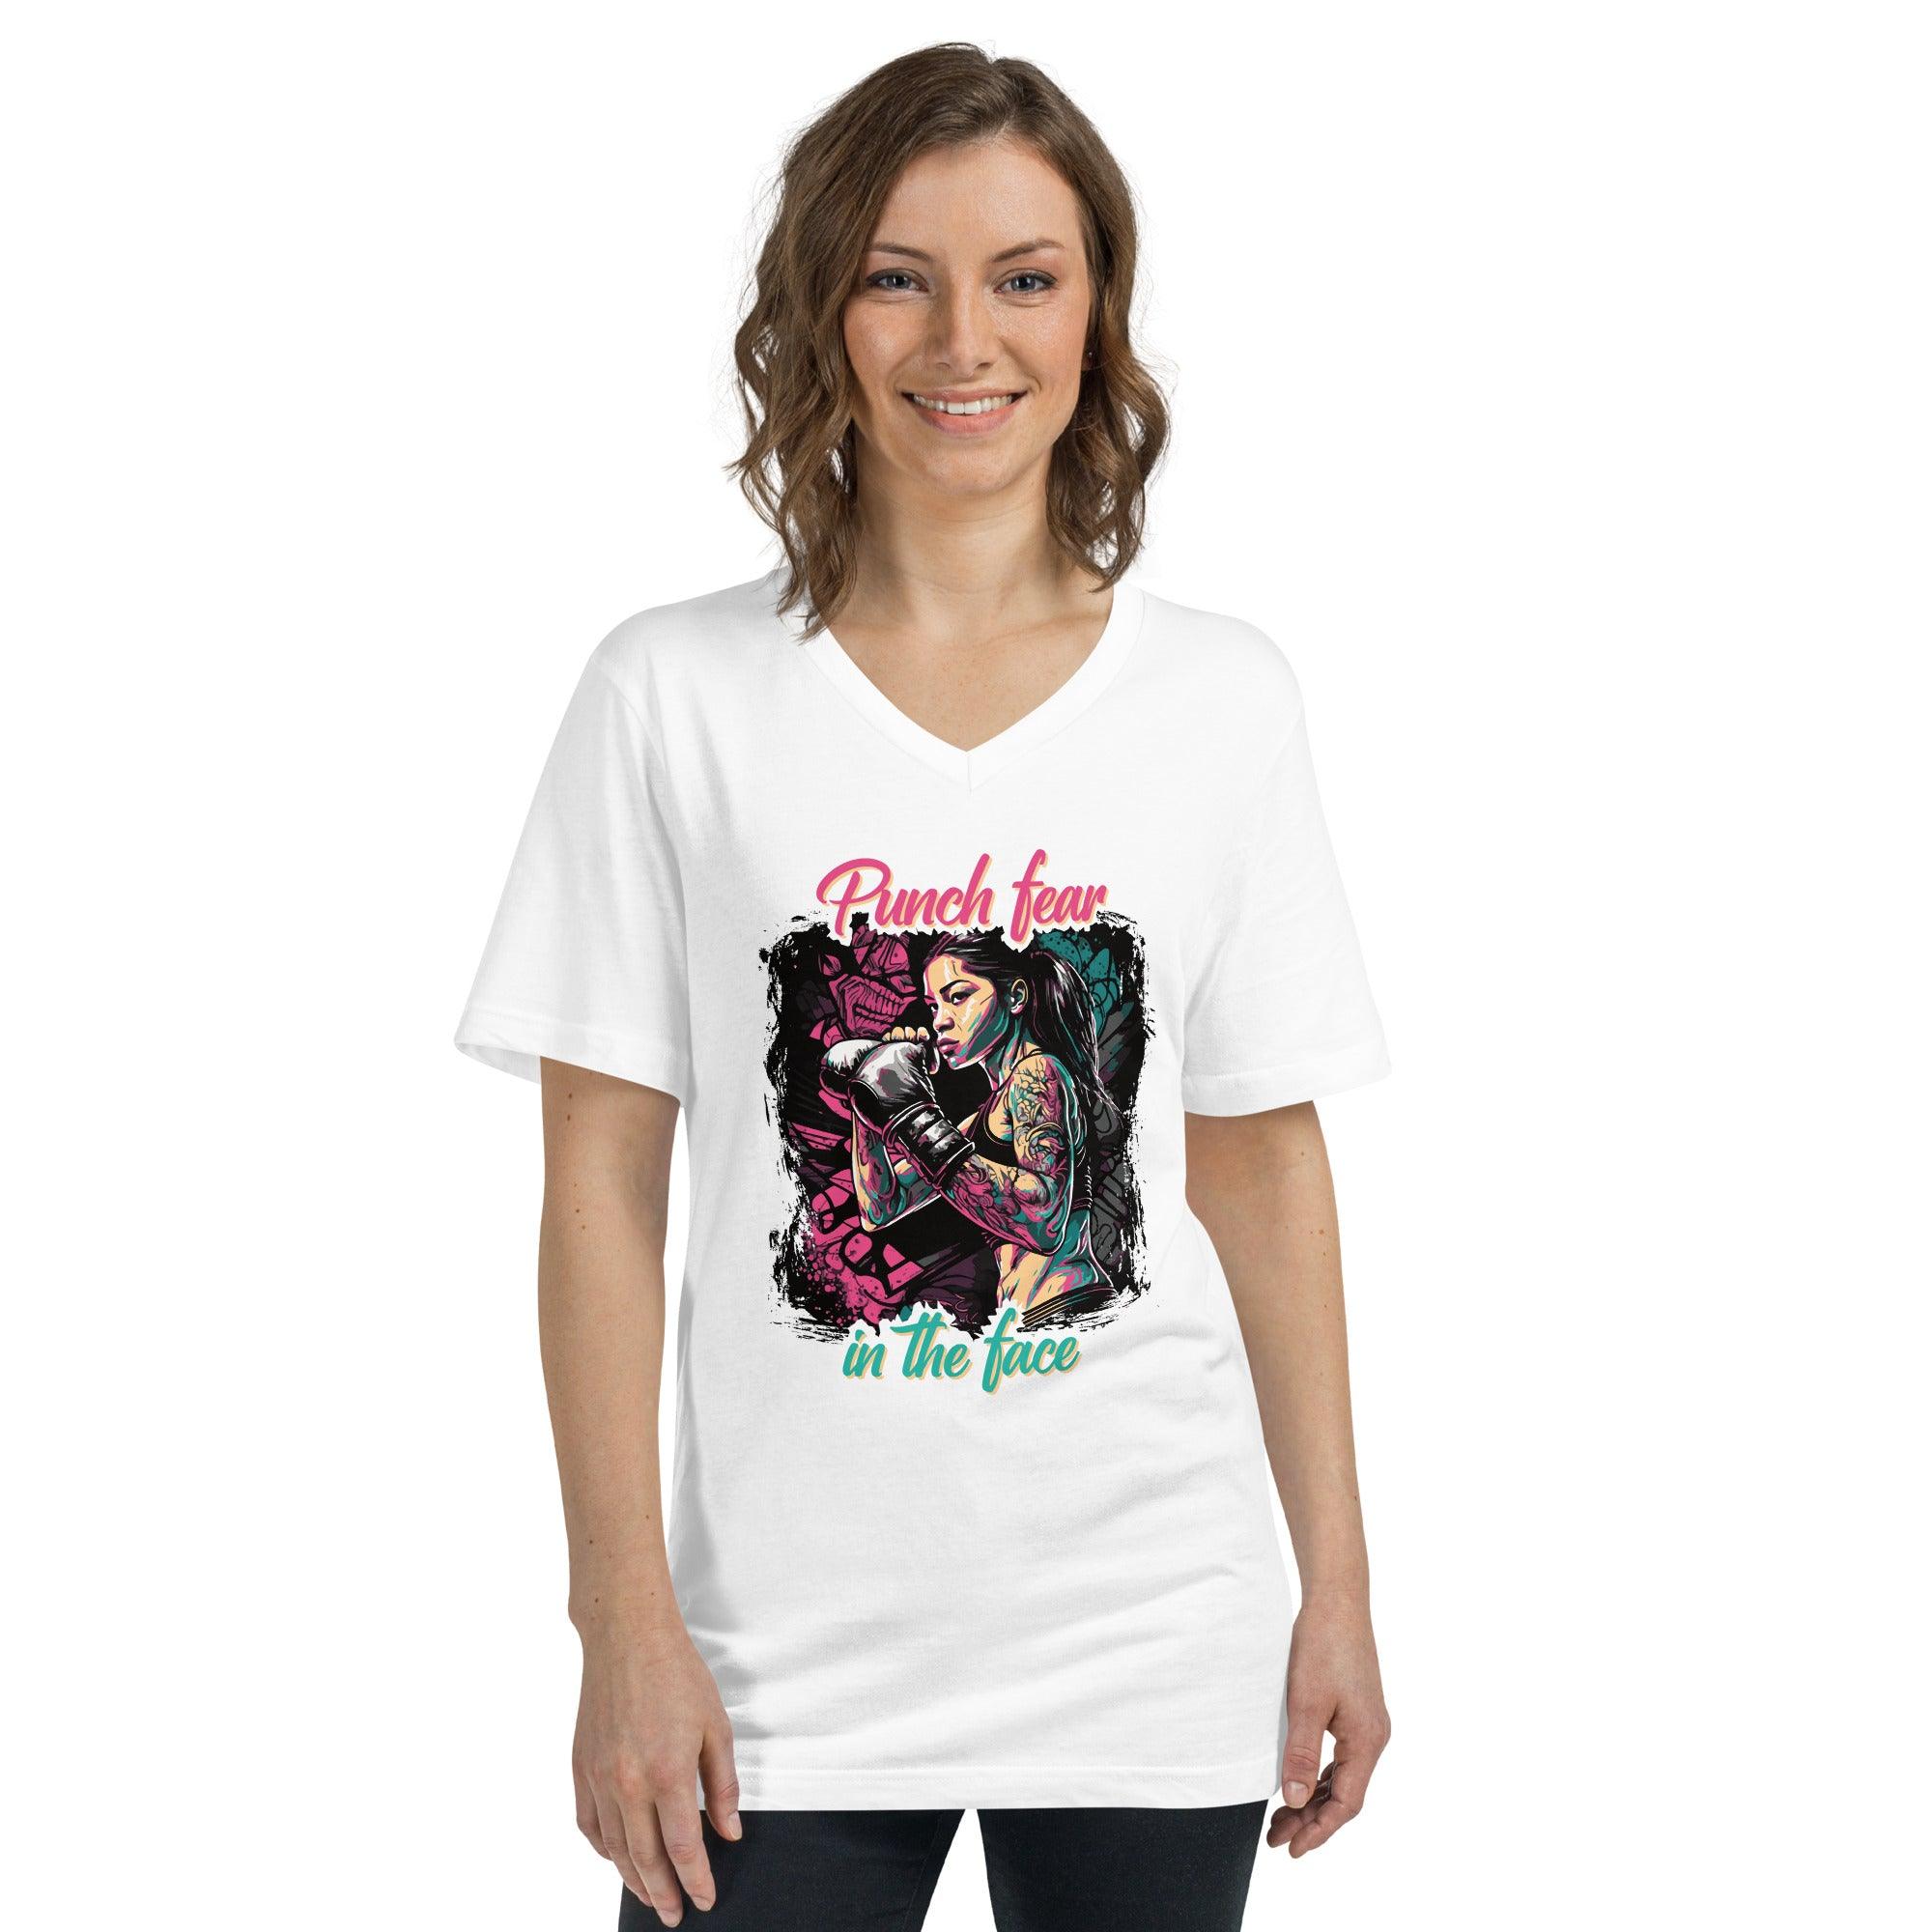 Punch Fear In The Face Unisex Short Sleeve V-Neck T-Shirt - Beyond T-shirts